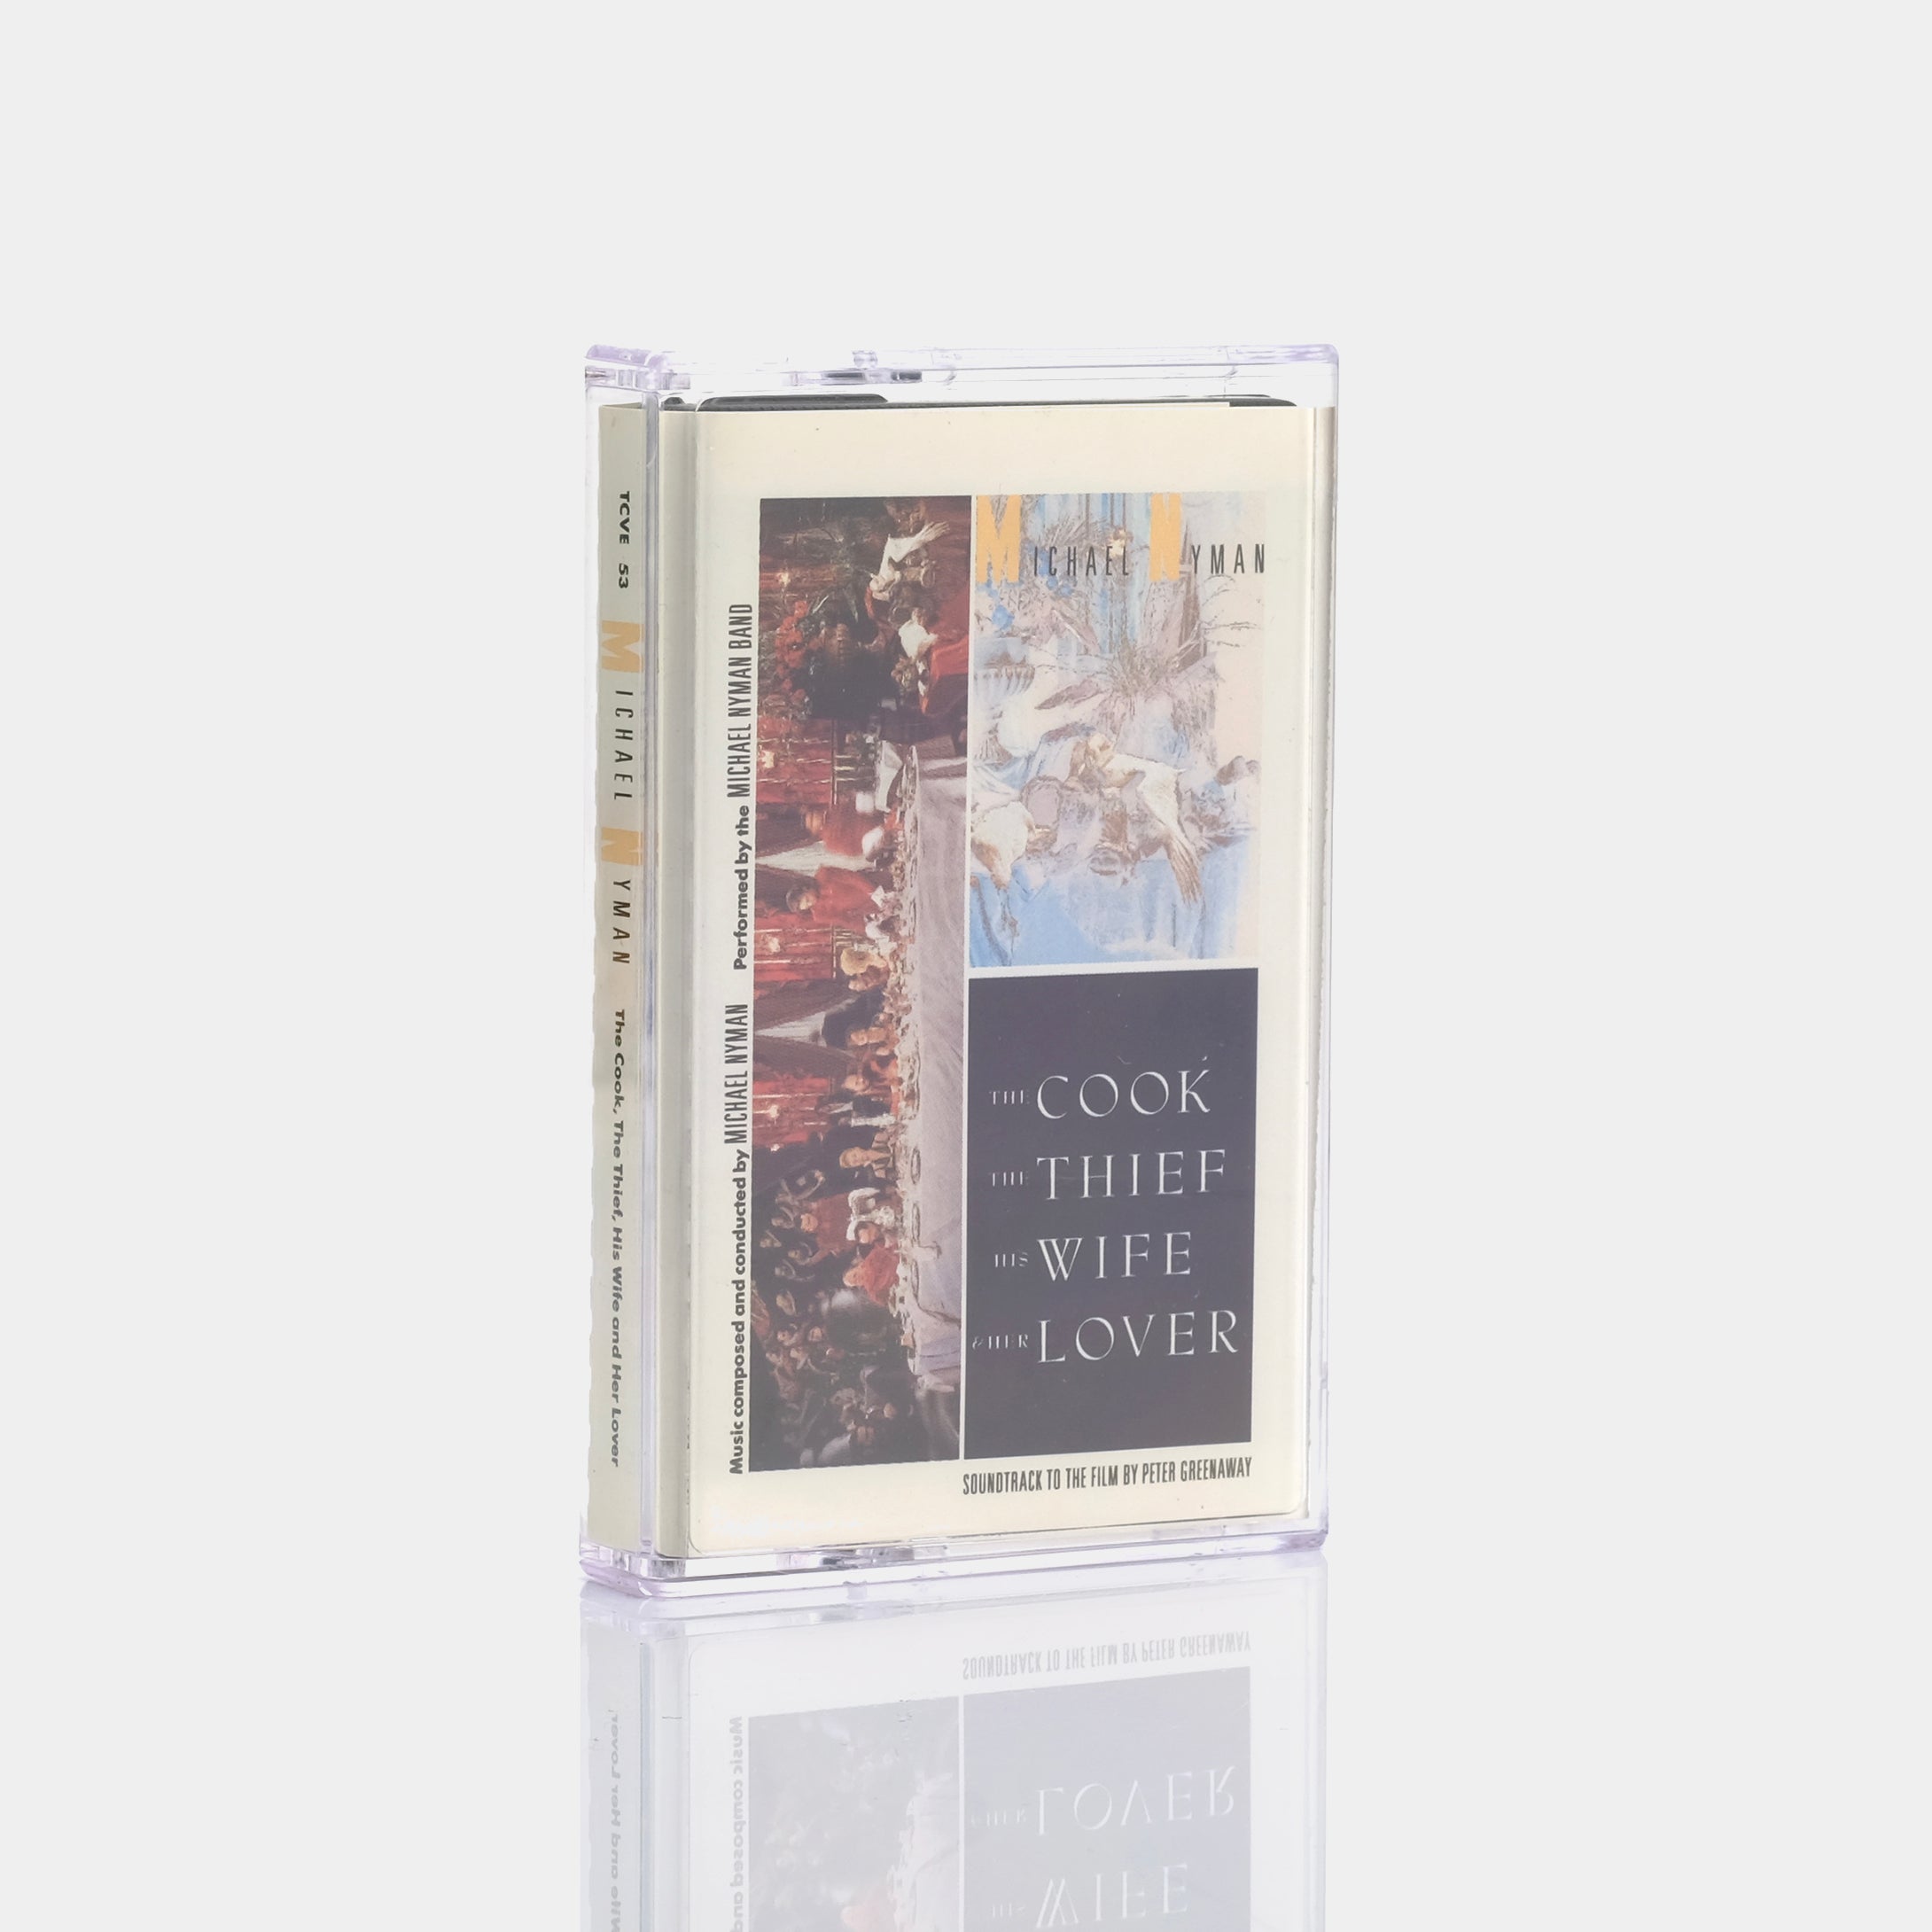 Michael Nyman - The Cook, The Thief, His Wife and Her Lover Cassette Tape